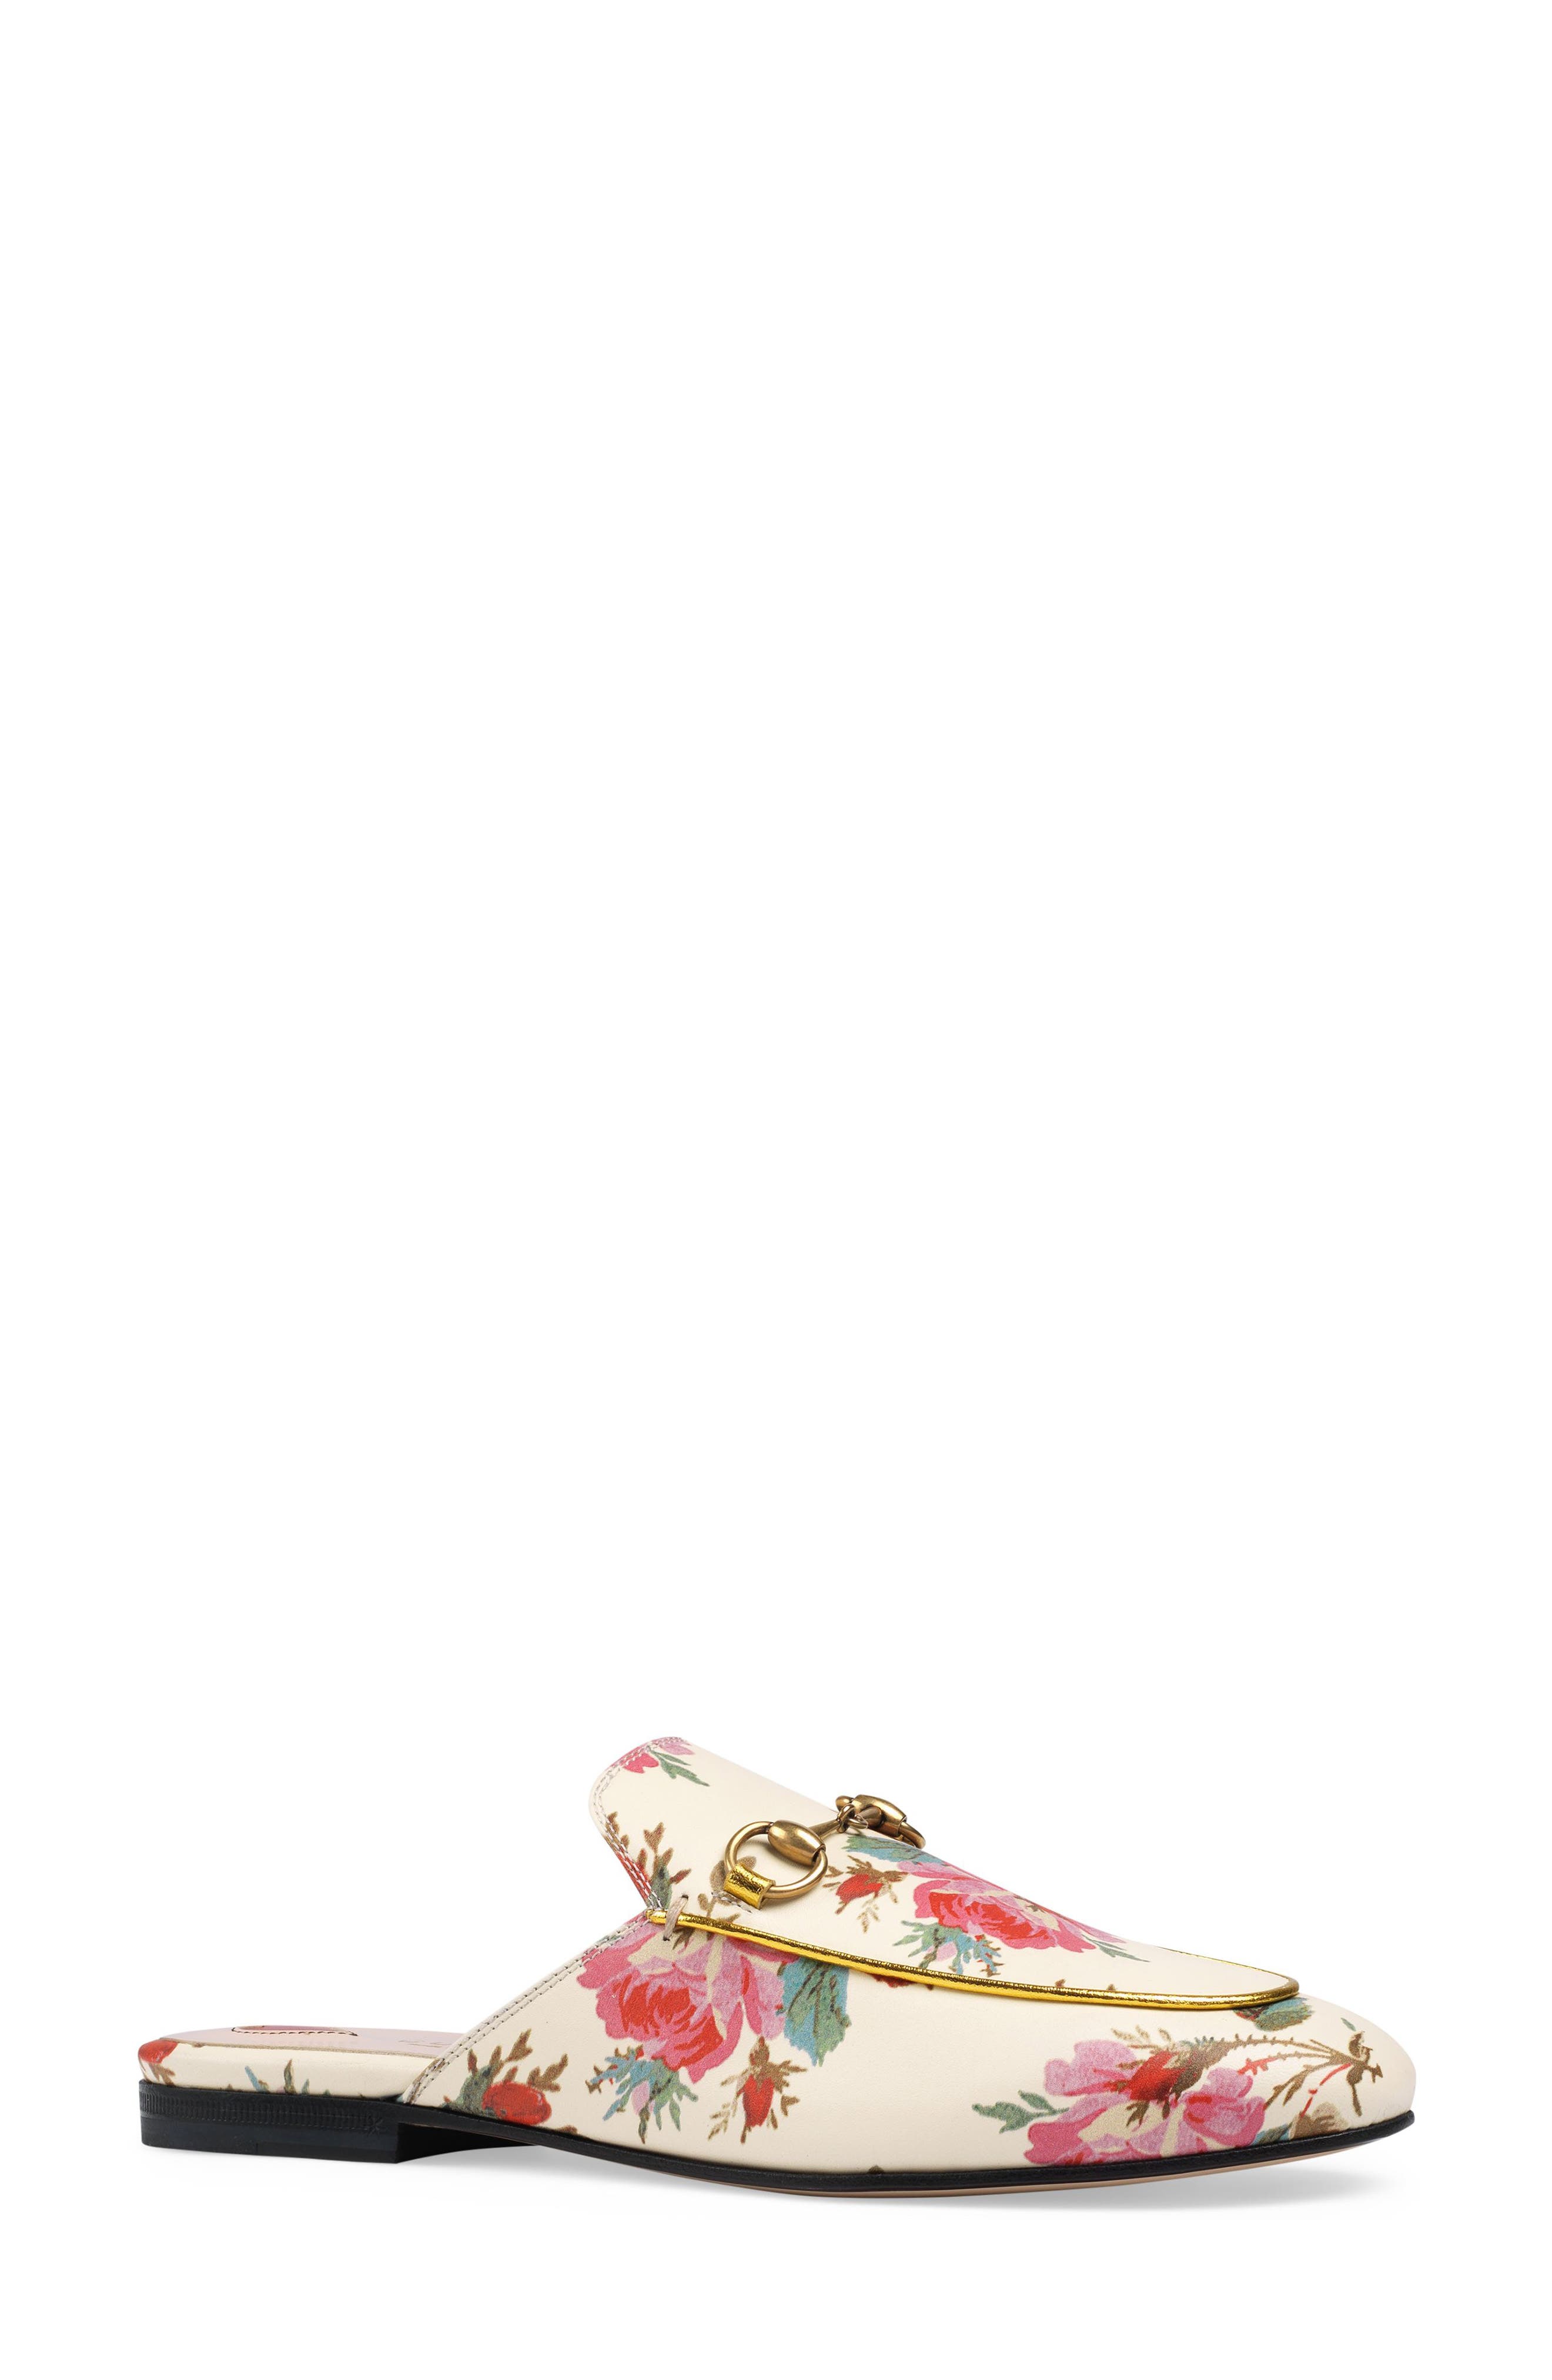 Gucci Princetown Floral Loafer Mule 